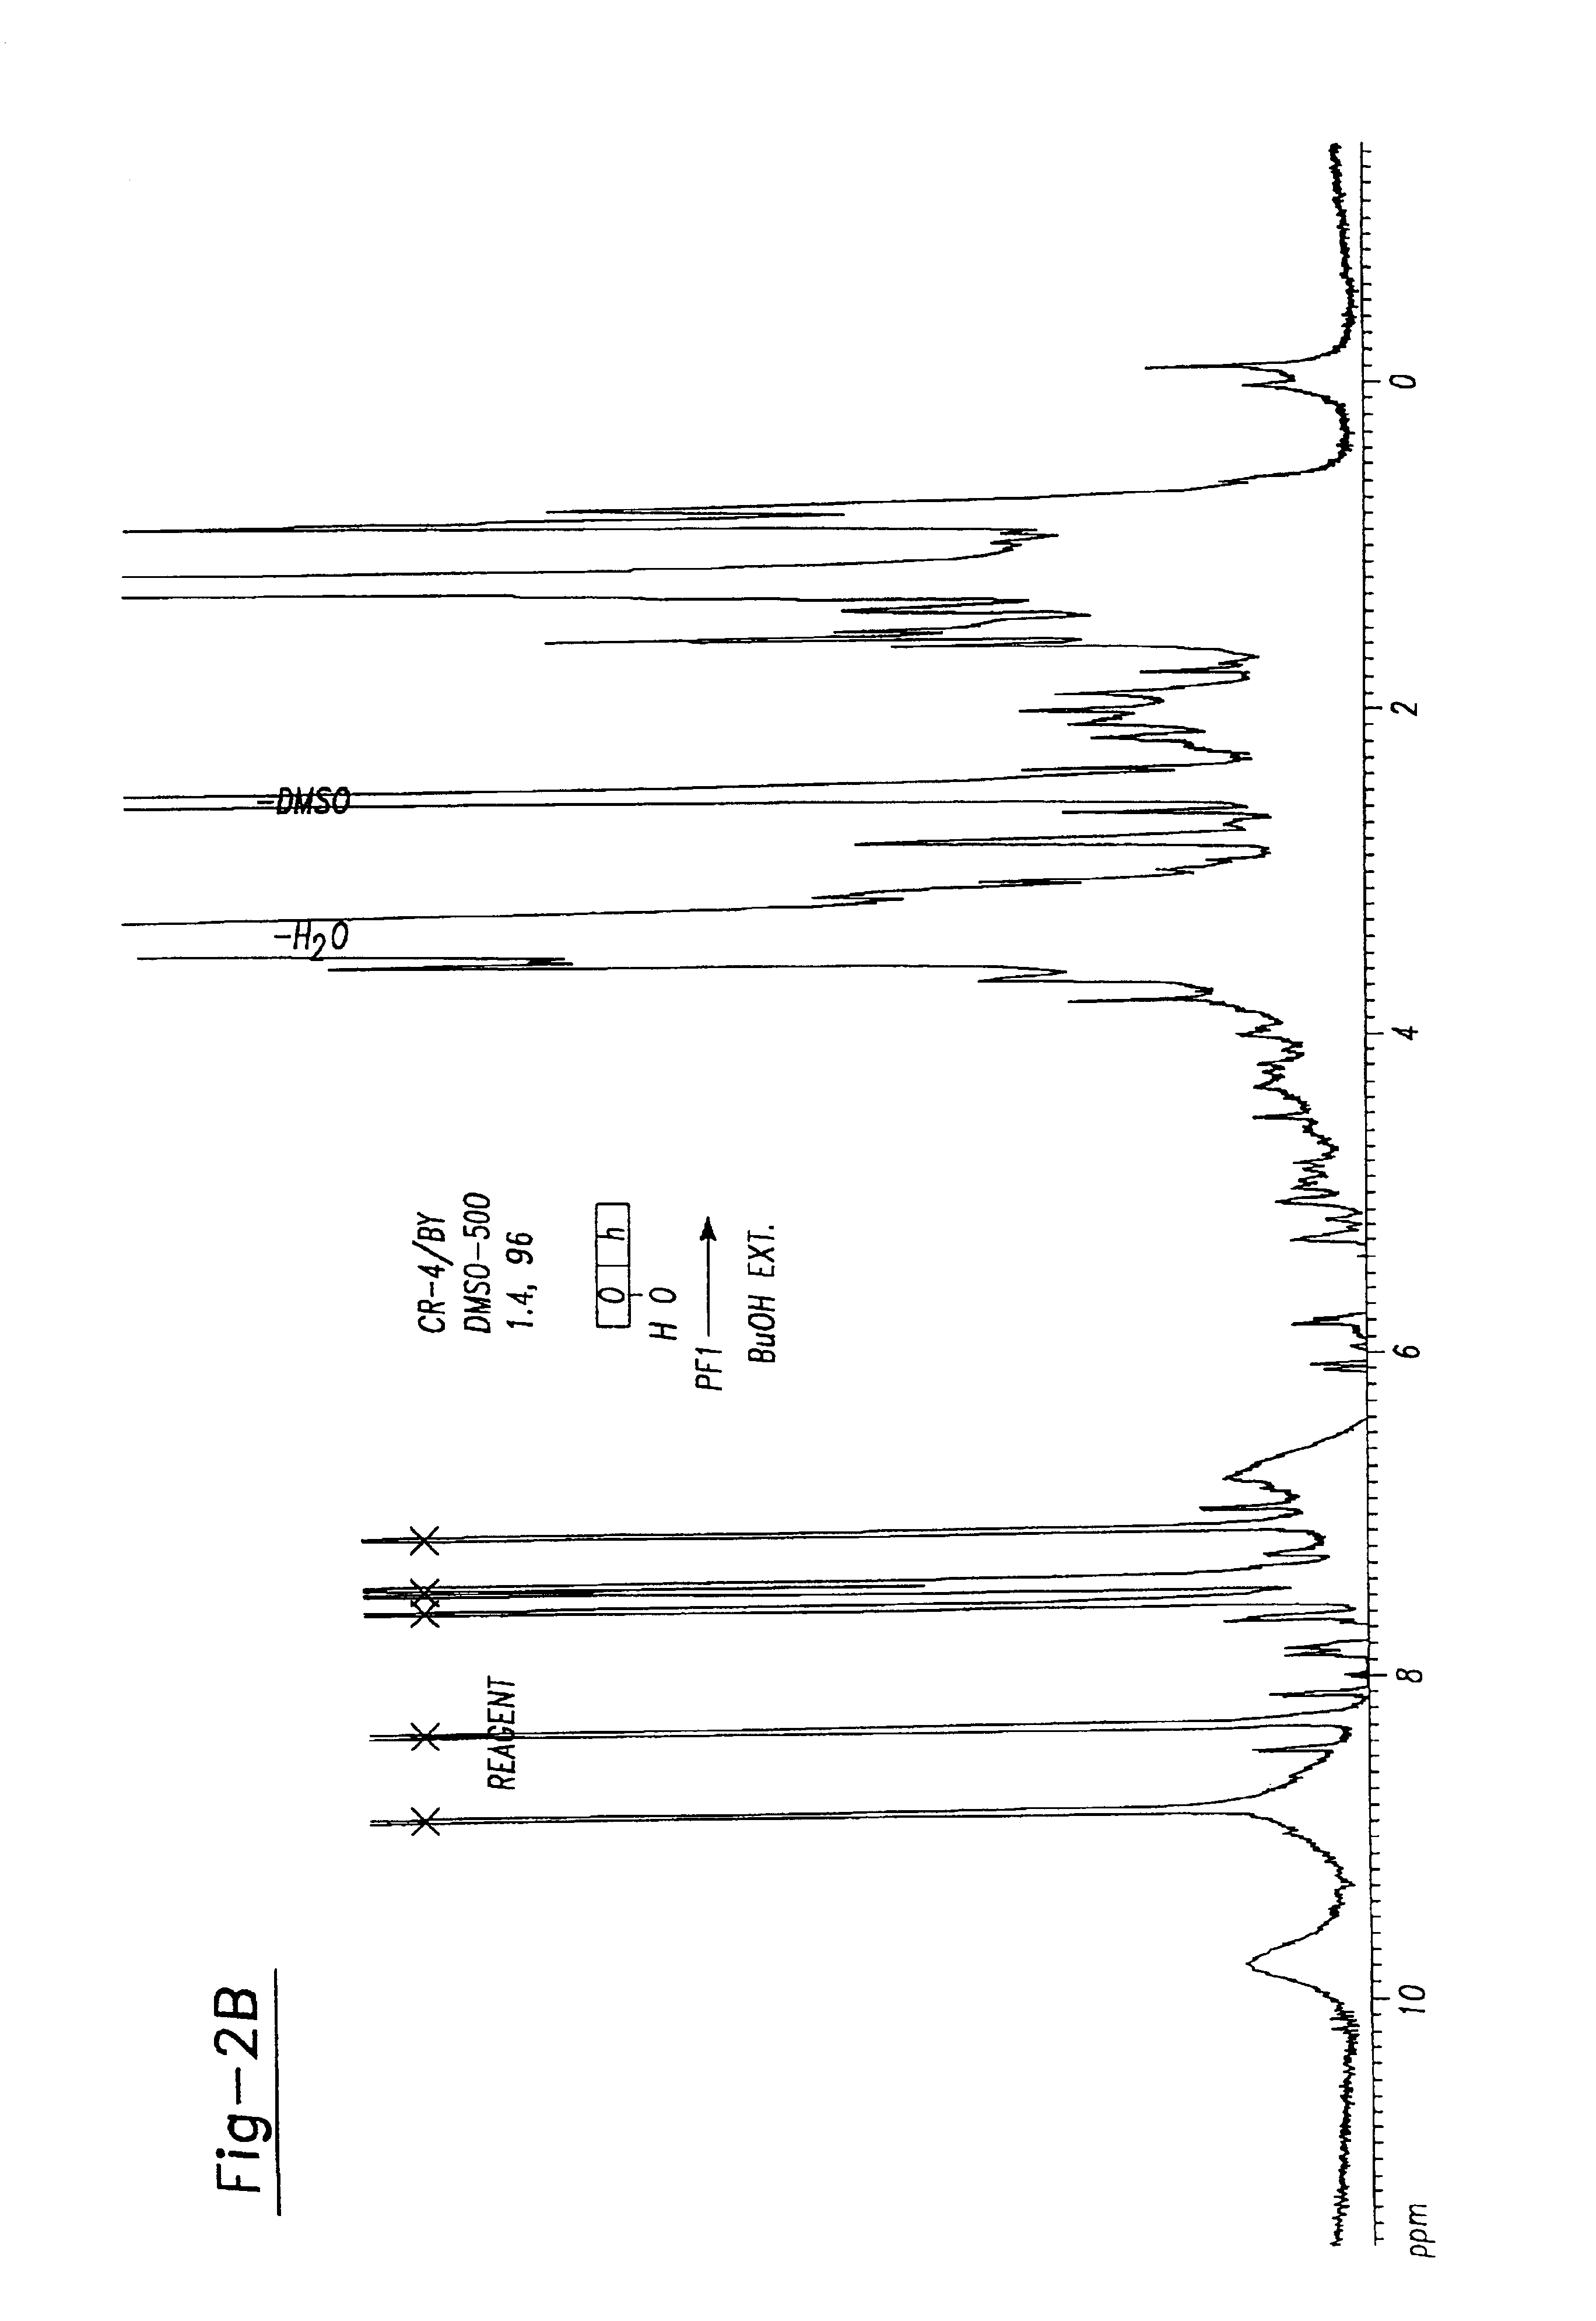 Anti-microbial-adhesion fraction derived from vaccinium